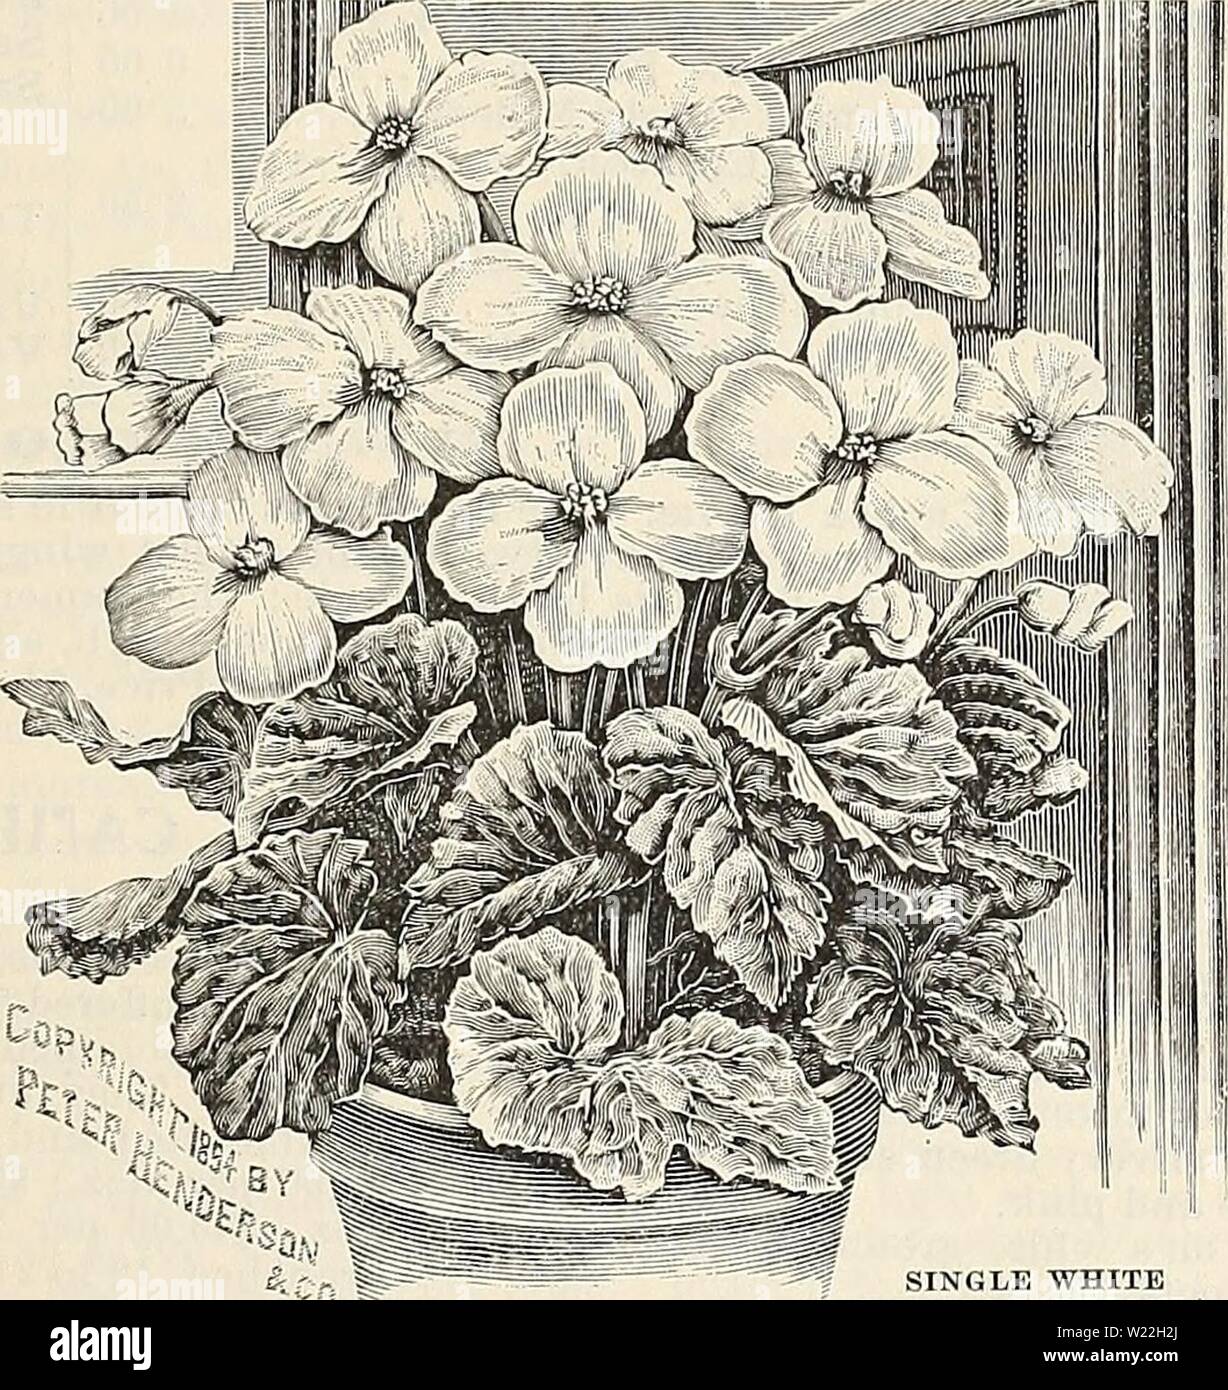 Archive image from page 16 of Dealers and florists wholesale list. Dealers and florists wholesale list of plants  dealersfloristsw18pete 0 Year: 1897  SINGLE WHITE TUBEROUSBEGONIA. AZALEA INDICA. DoubleFlowered Azaleas. A Borsig. A pure white fine form. Apoilo. Large flower; blood red. Bernard Andrea Alba. Fine white. Deutsche Perle. Pure white. Docteur de Moor. Intense rose. Erapereur de Bresil. Pink and white. Francoi de Vos. A clear red. Imp. des Indes. Rose, edged white. Mme. Camille. White, striped red. Mme. Van der Cruyssen. Bright rose. Niobe. Fine double white. Simon Mardner. Intense r Stock Photo